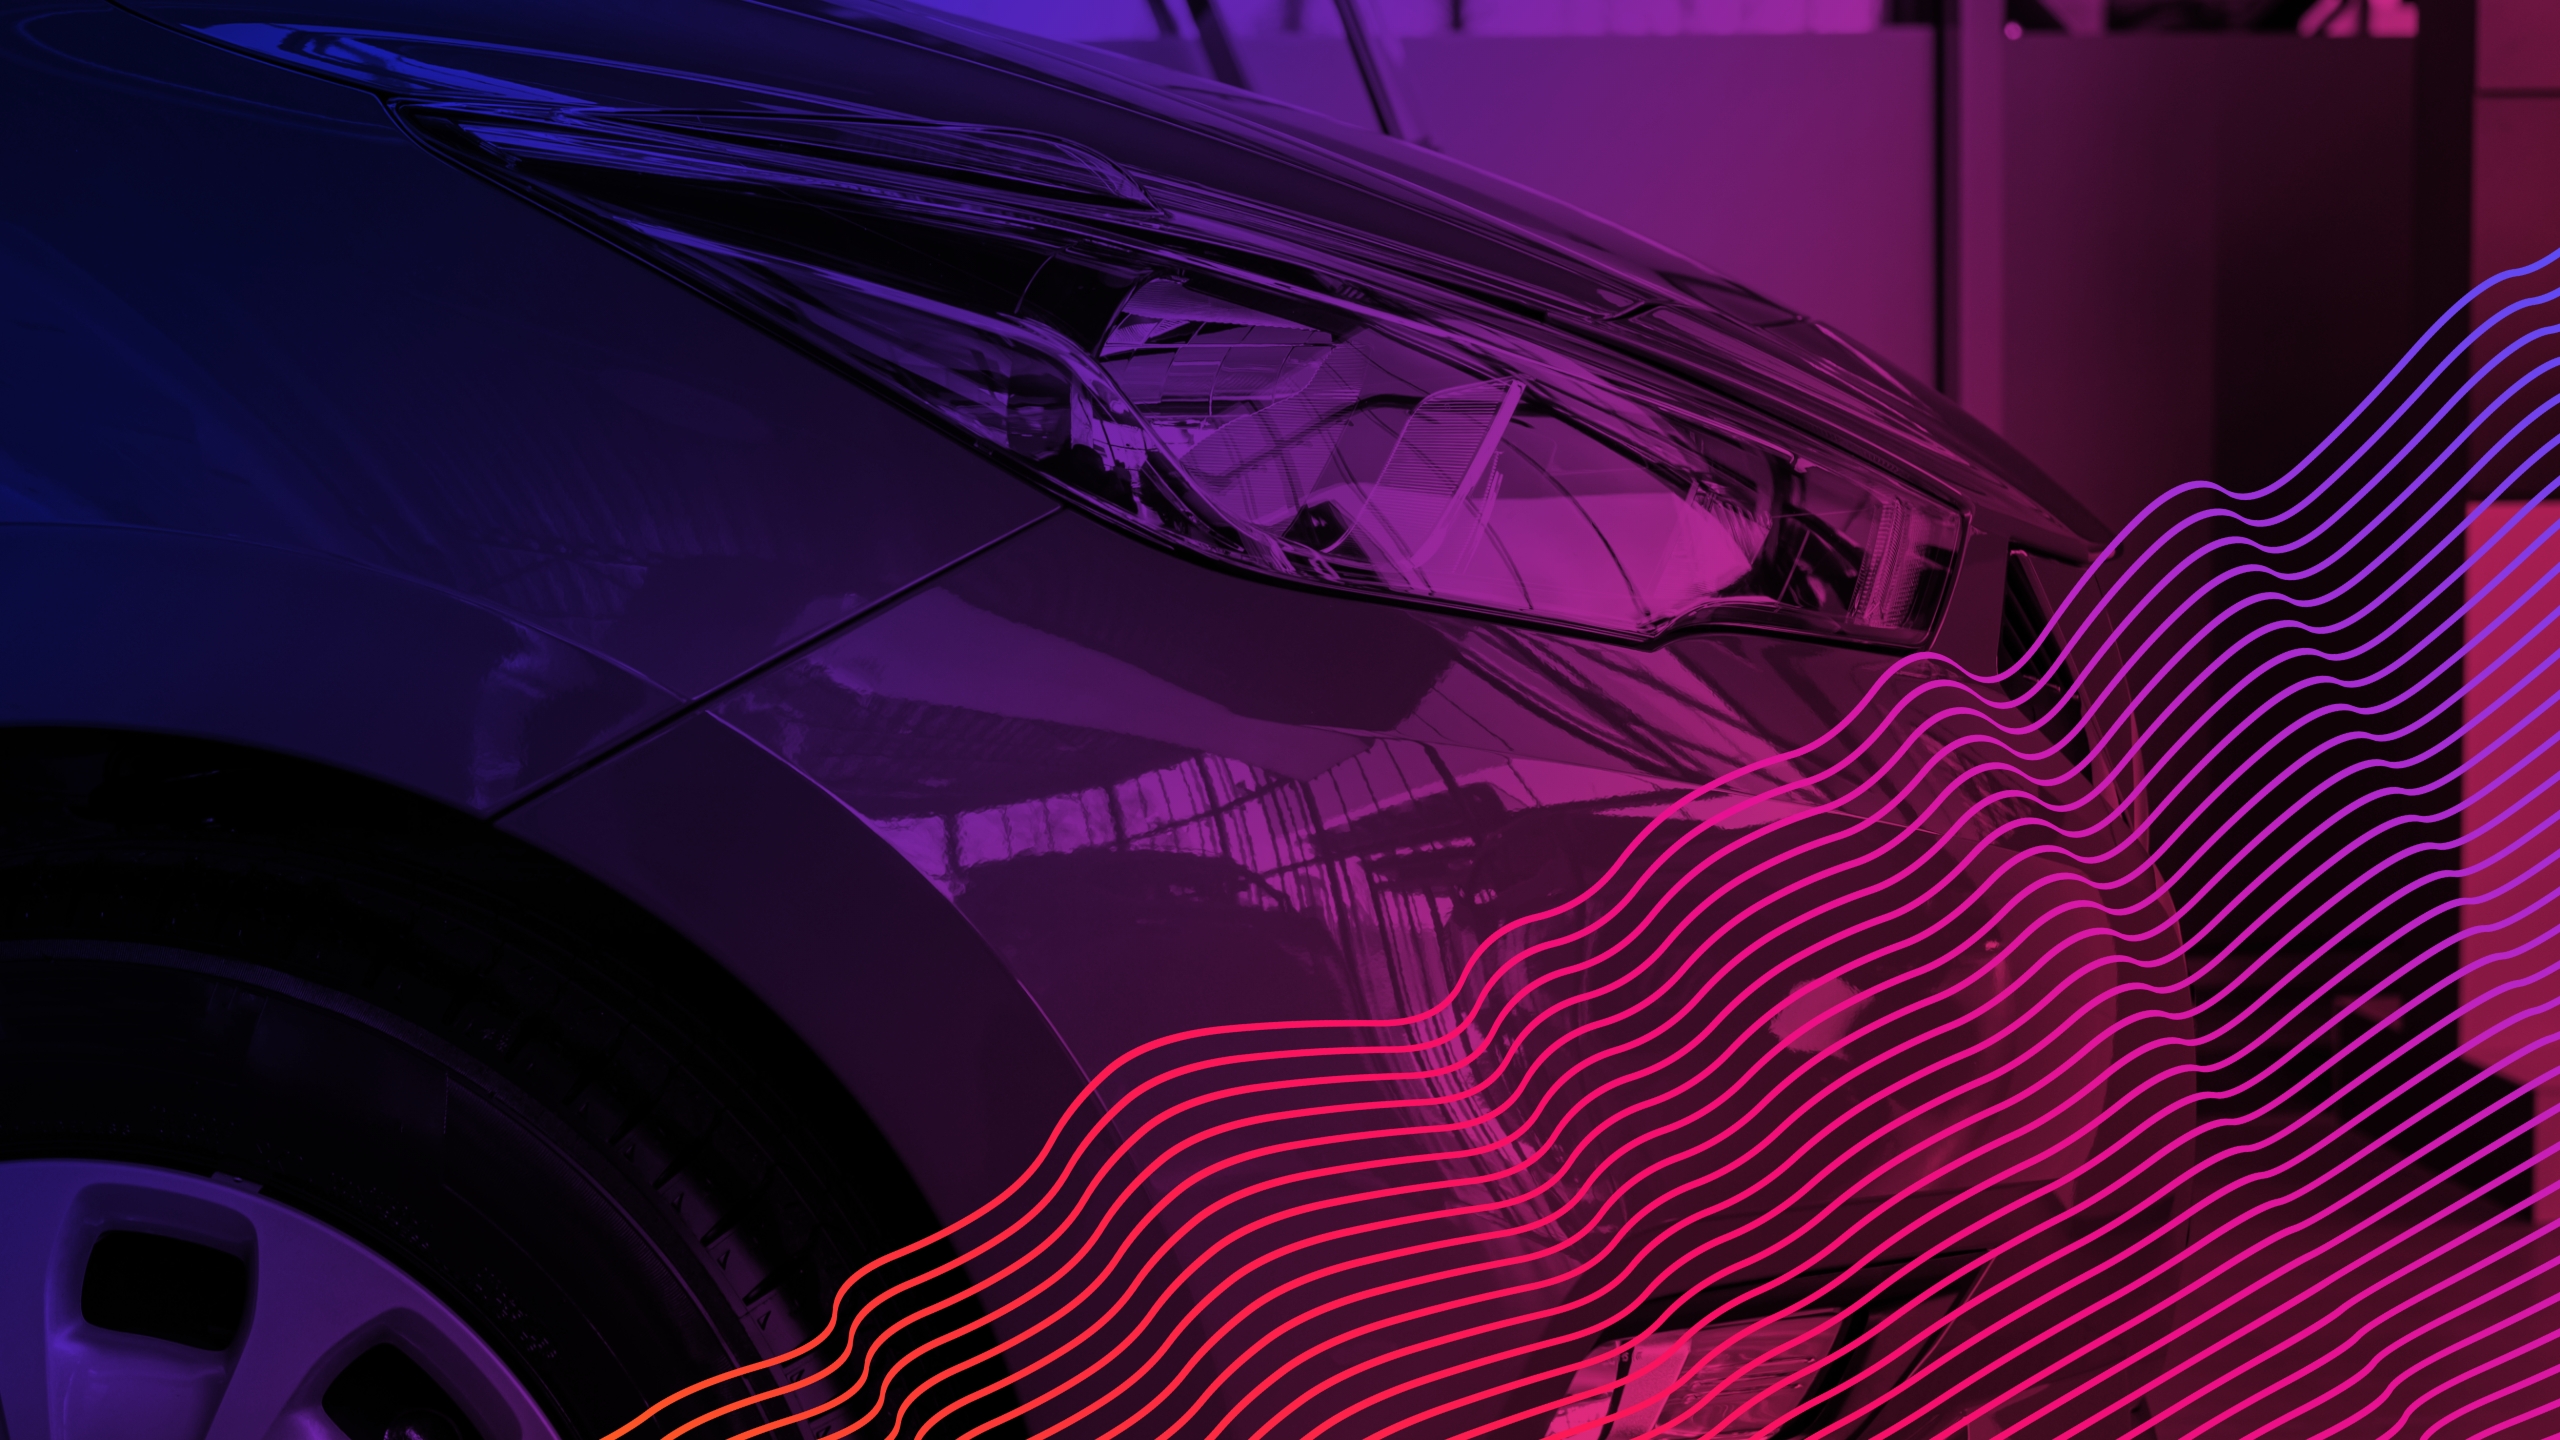 The front of a car with a purple overlay over the image